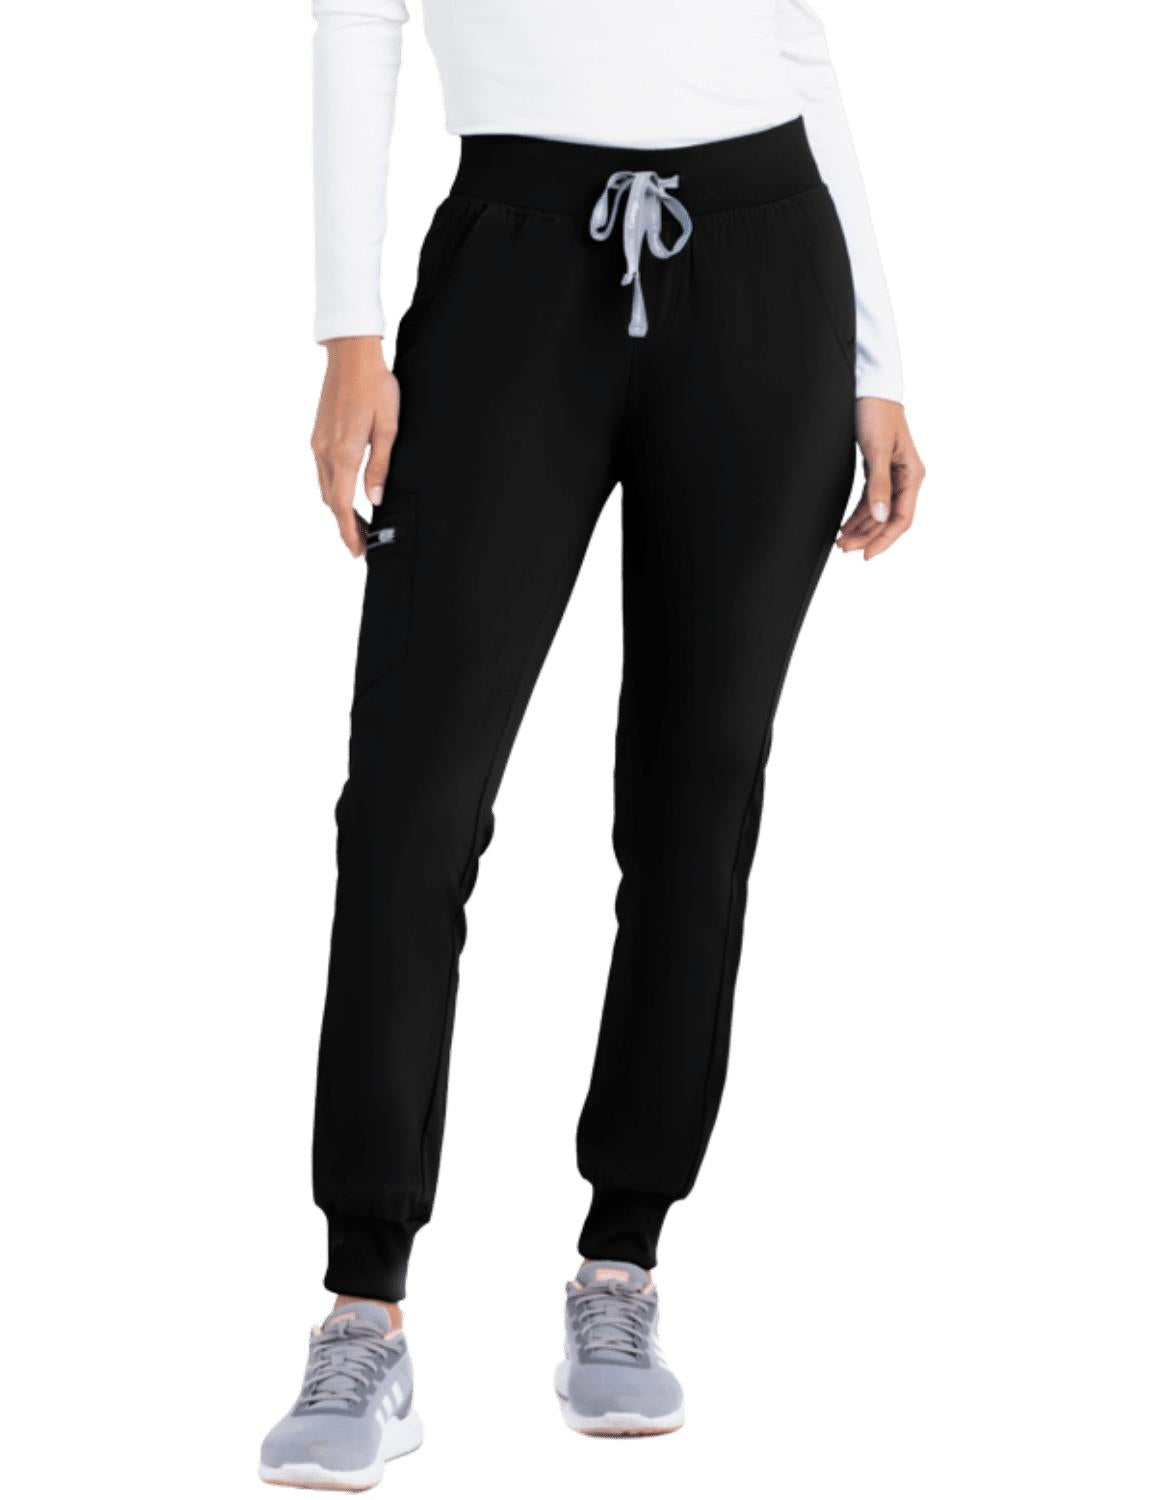 Life Threads Women's Active Jogger Pant